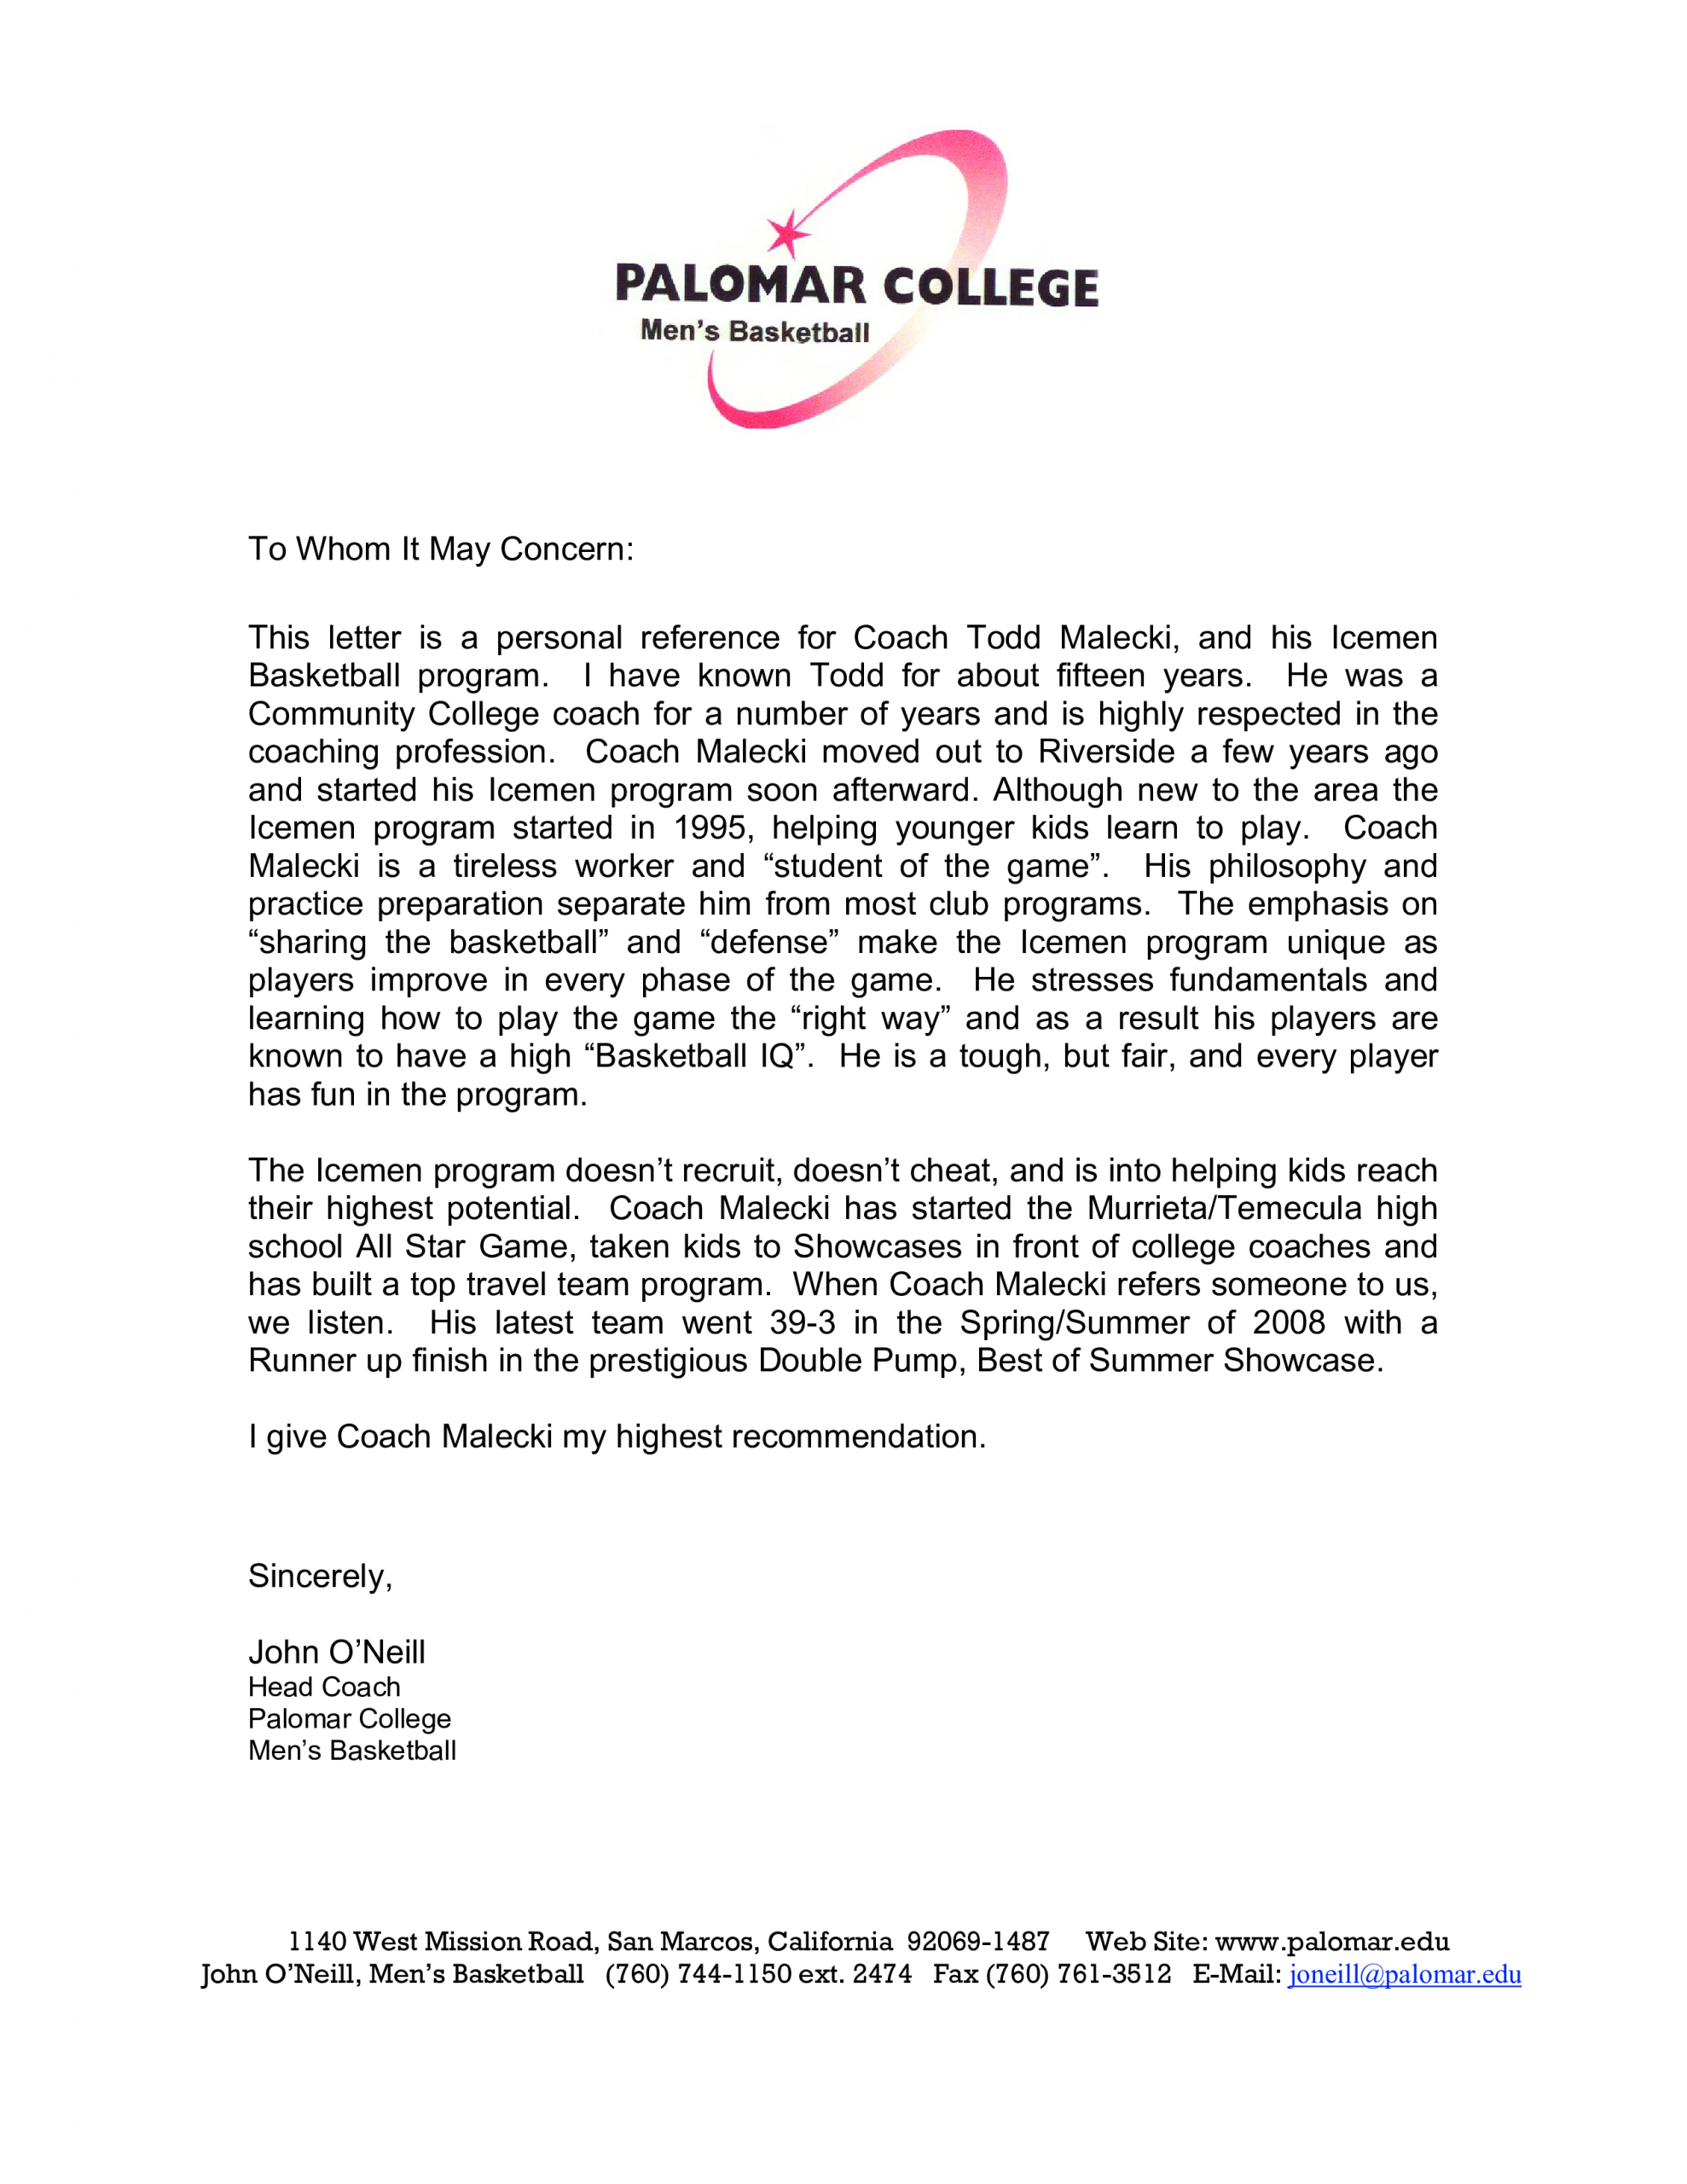 College Letter Of Recommendation From Coach Debandje inside proportions 2550 X 3300